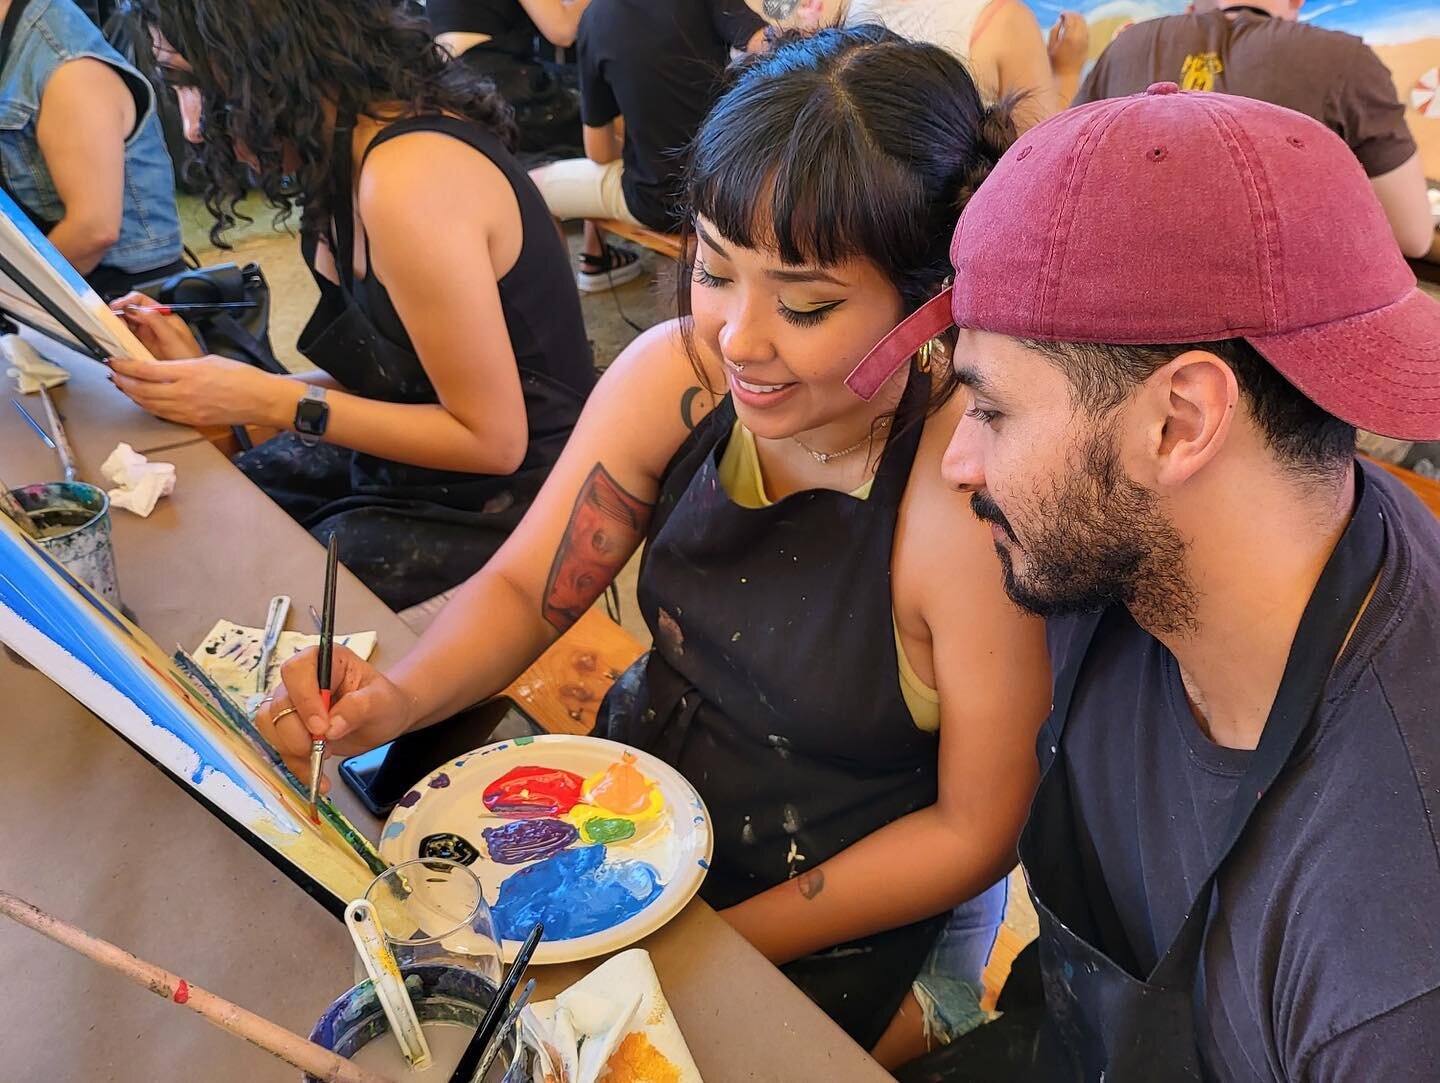 Our very first event at @steelcraft Bellflower! We absolutely loved the atmosphere and had so much fun painting with all of you! We already can&rsquo;t wait to come back! #bestofla #bestoflosangeles #brushstrokesandbevs #brushstrokesandbeverages #art